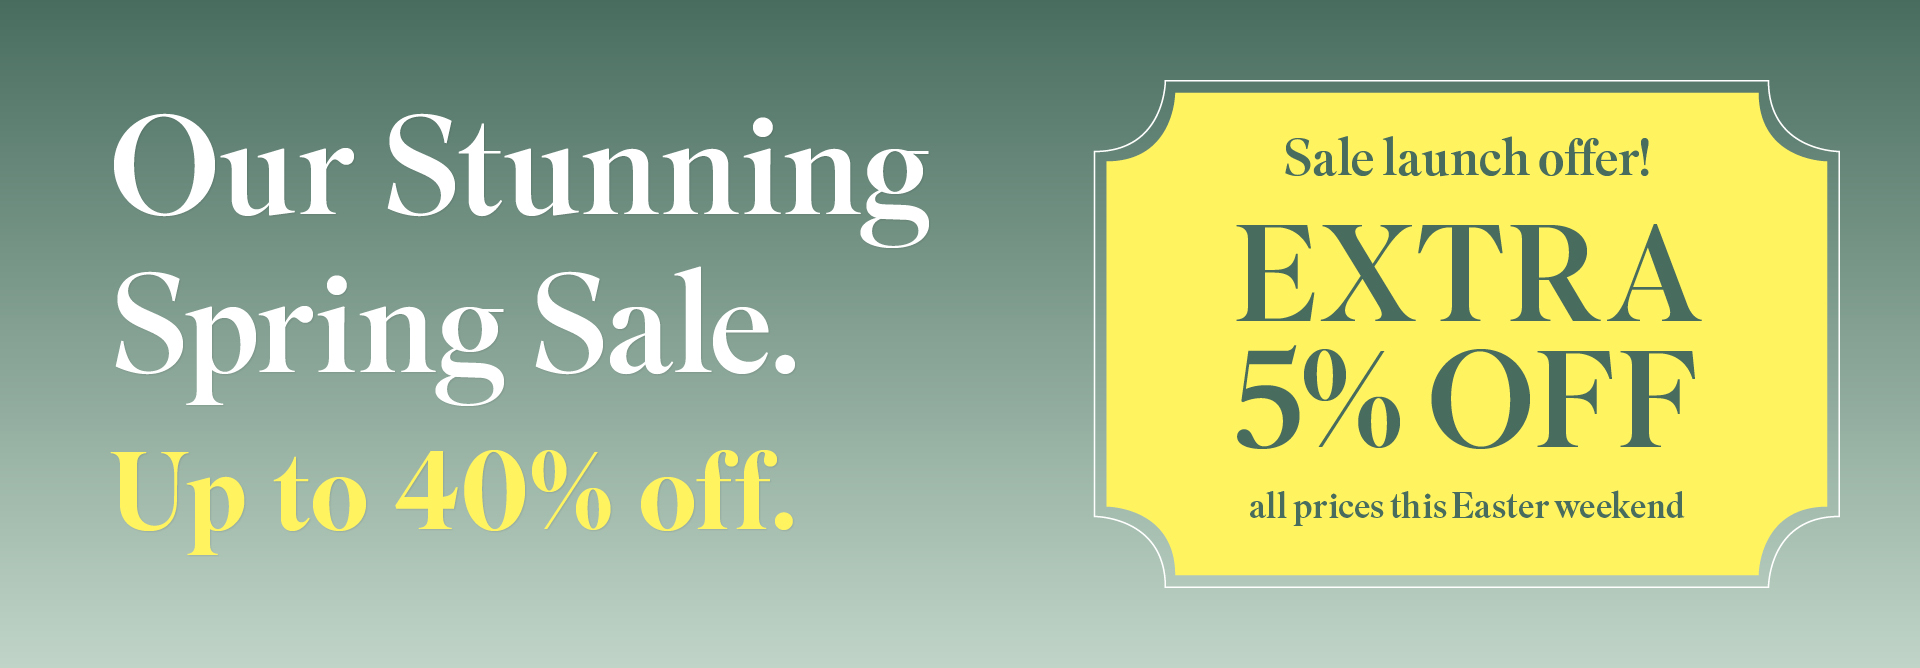 Our Stunning Spring Sale - Extra 5% off all prices this Easter weekend